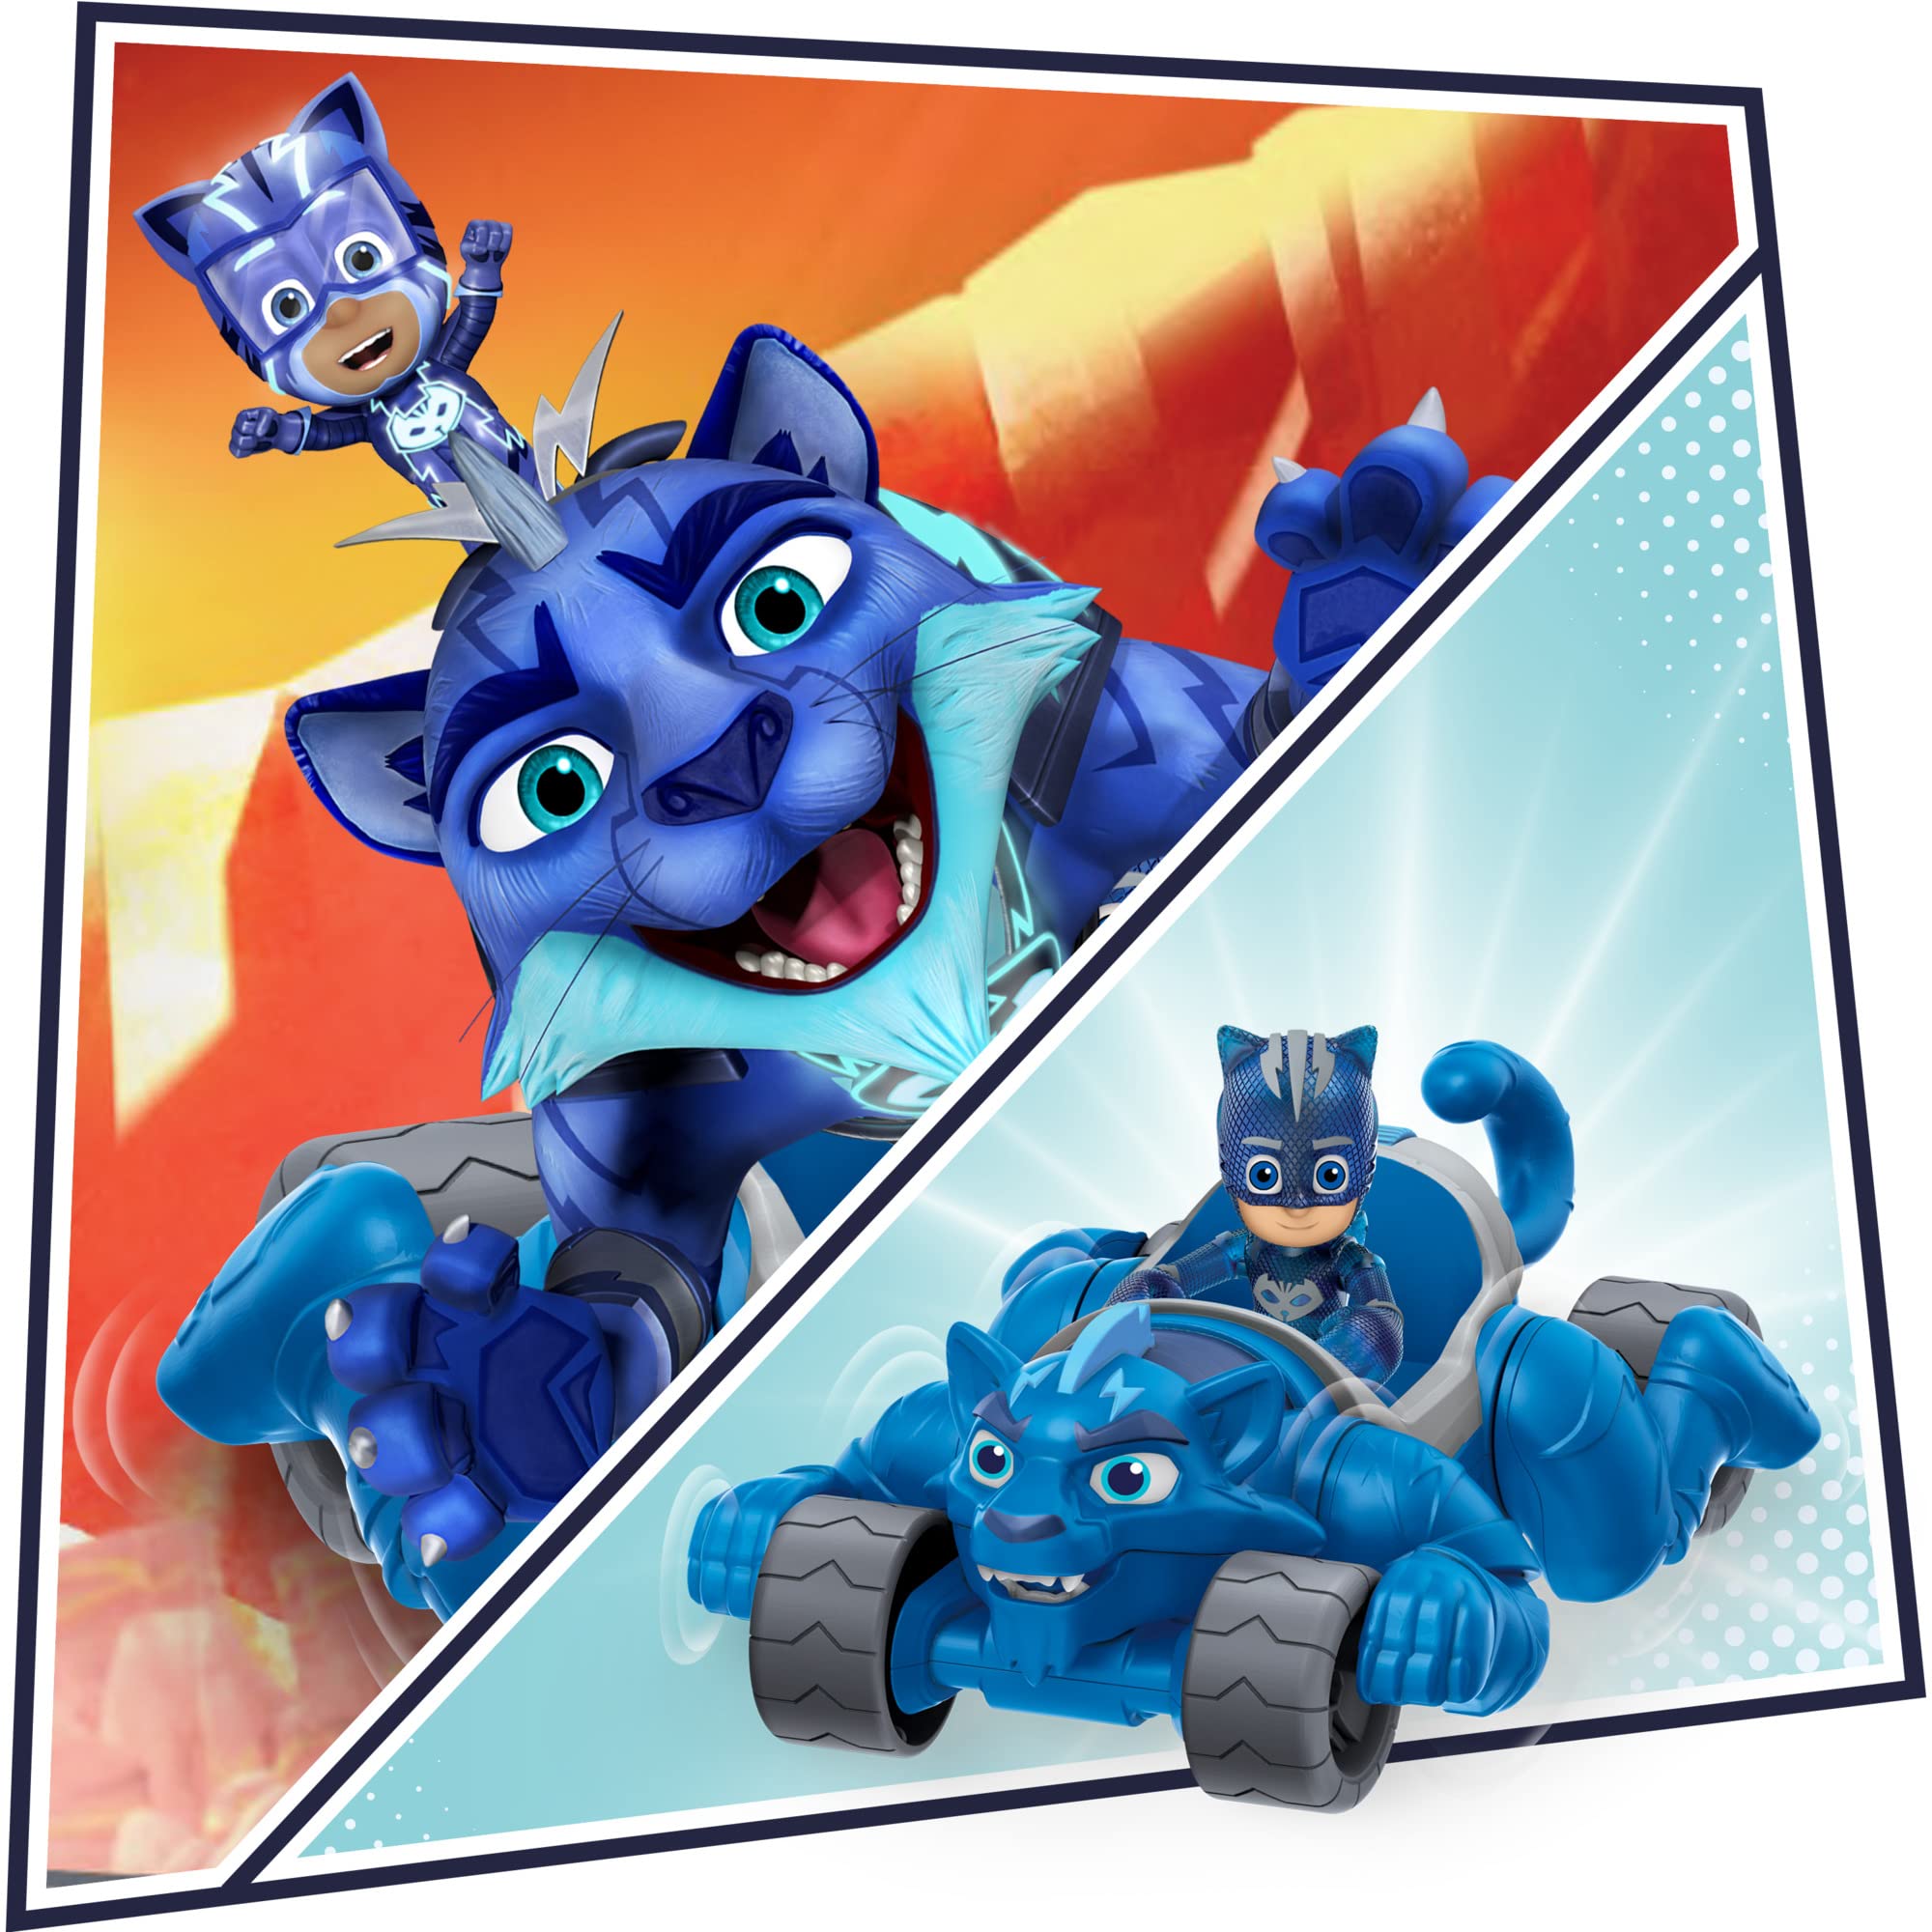 PJ Masks Animal Power Catboy Animal Rider Toy Car, with Catboy Action Figure, Deluxe Toy Vehicles, Superhero Toys, Preschool Toys for 3 Year Old Boys and Girls and Up